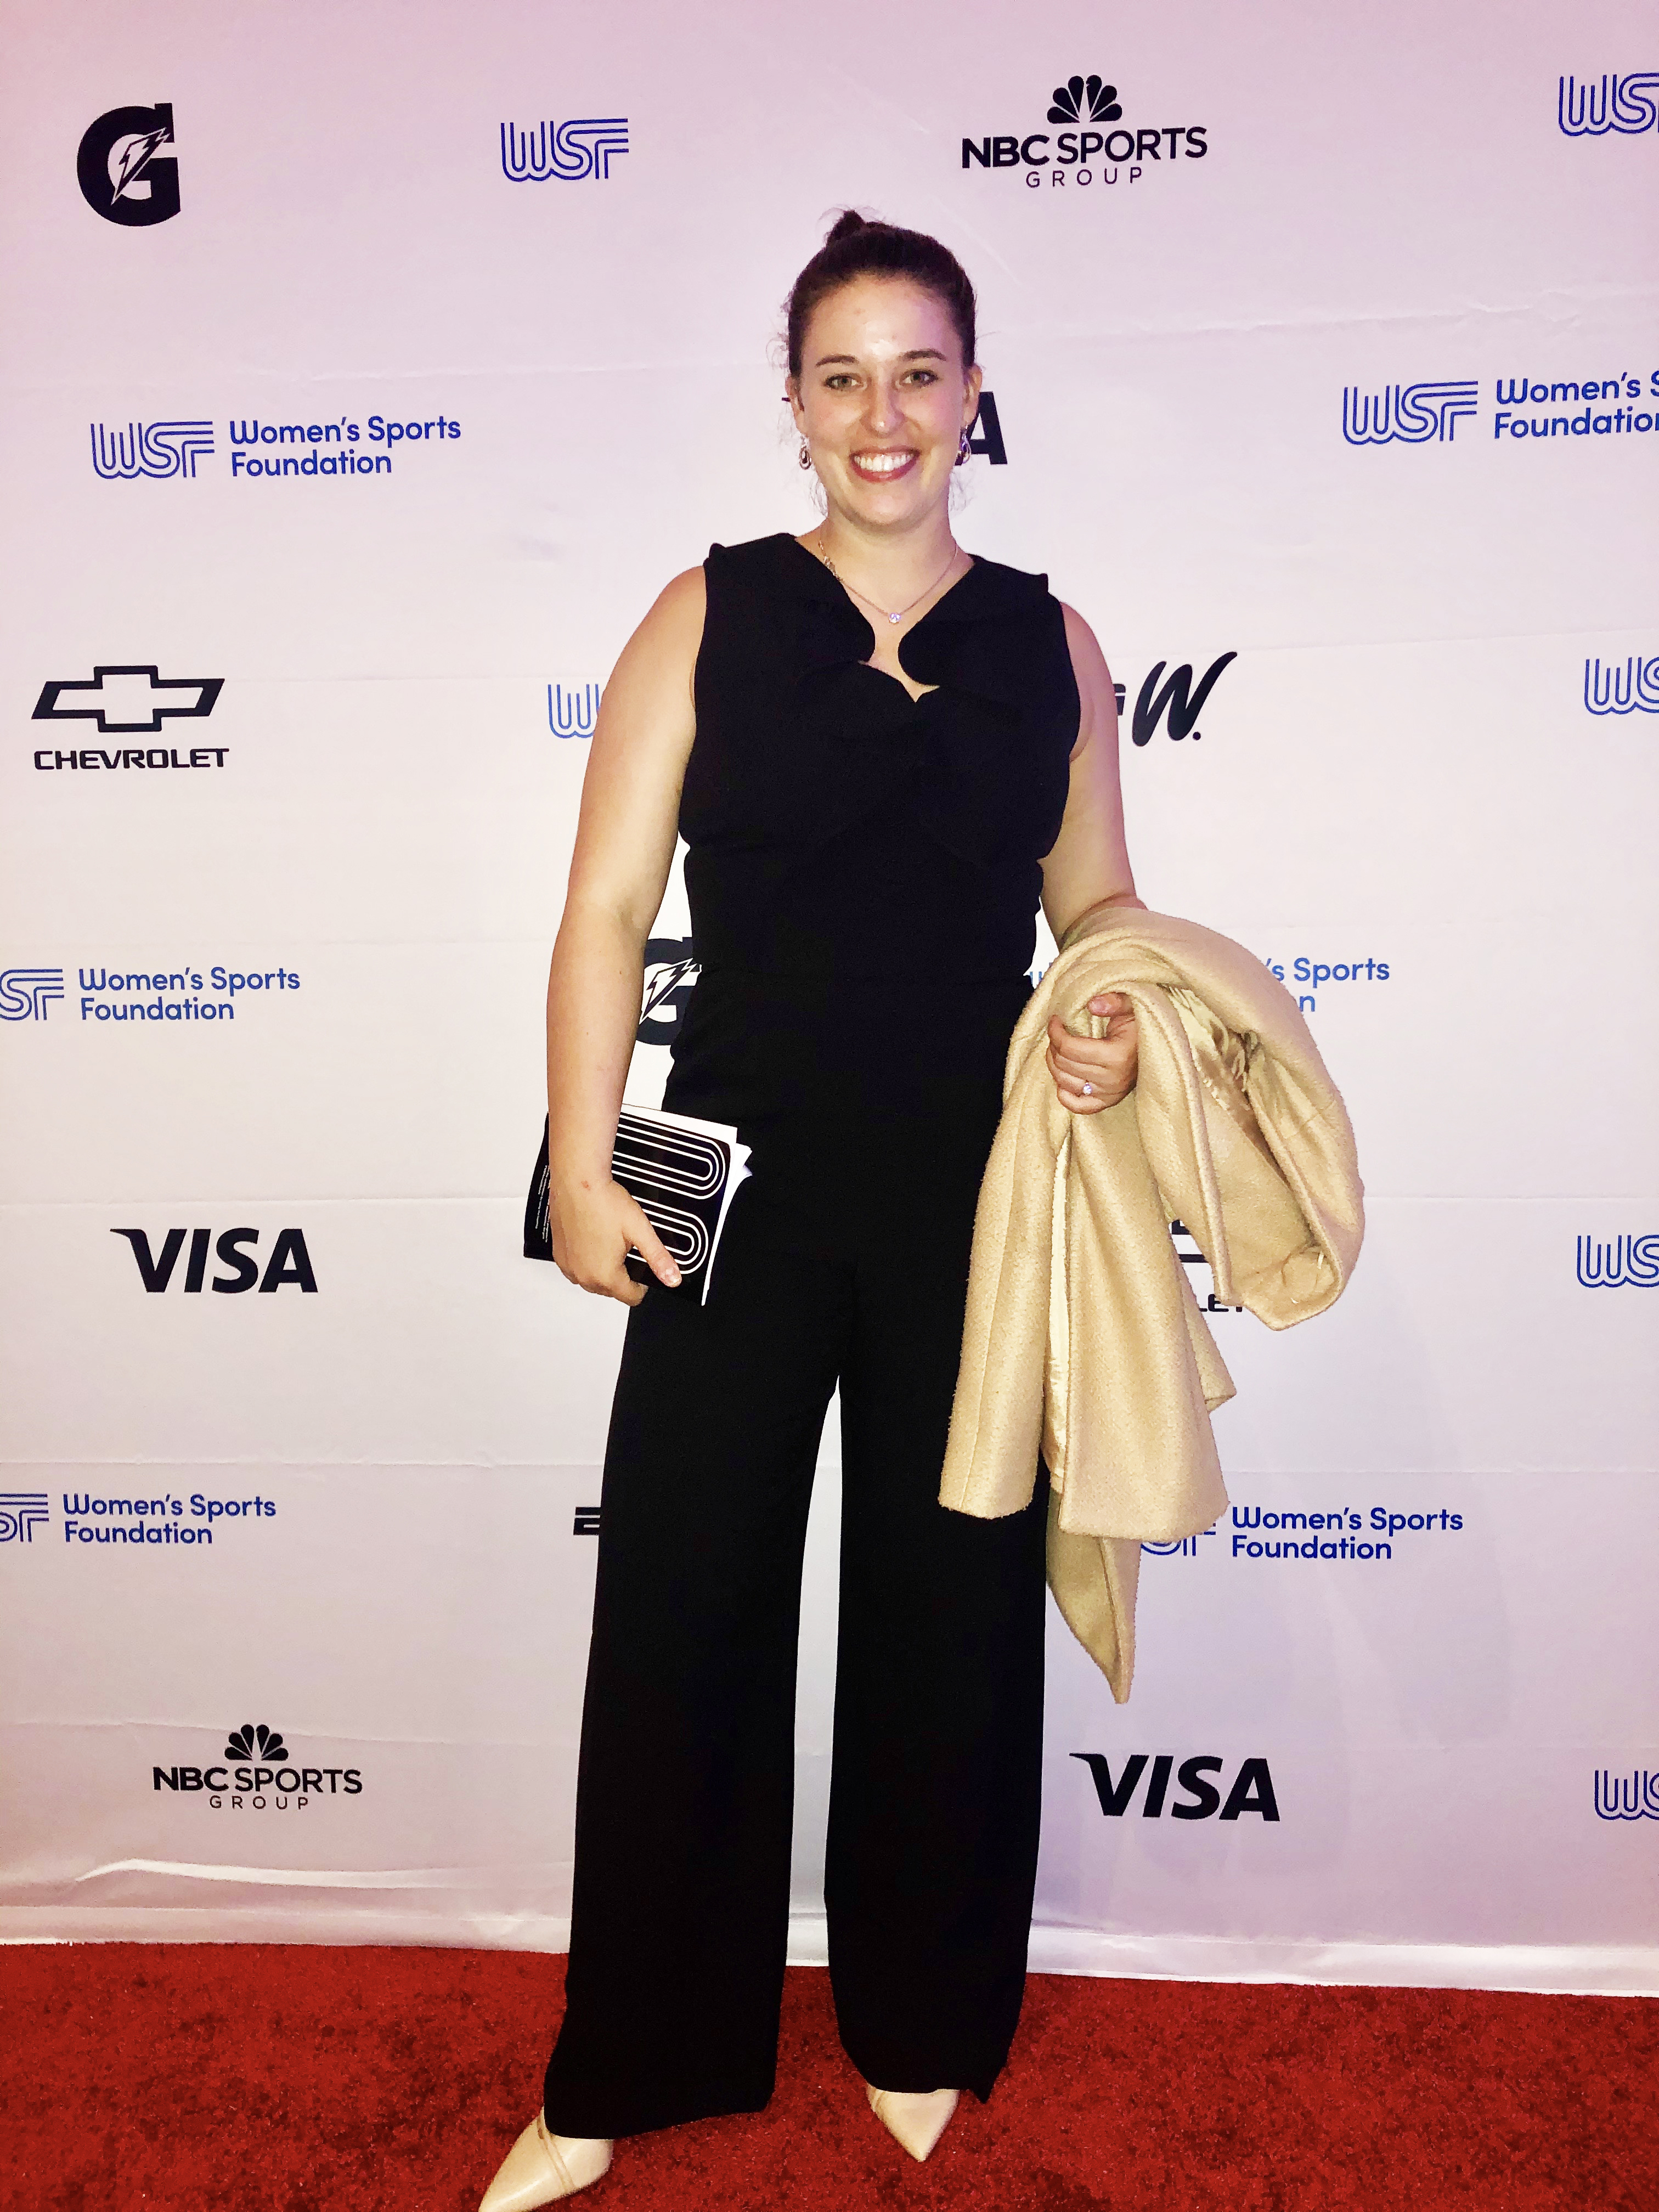 Kelcie Tolan at the WSF’s Athlete Leadership Connection event in New York City, where she received the Tara VanDerveer grant.